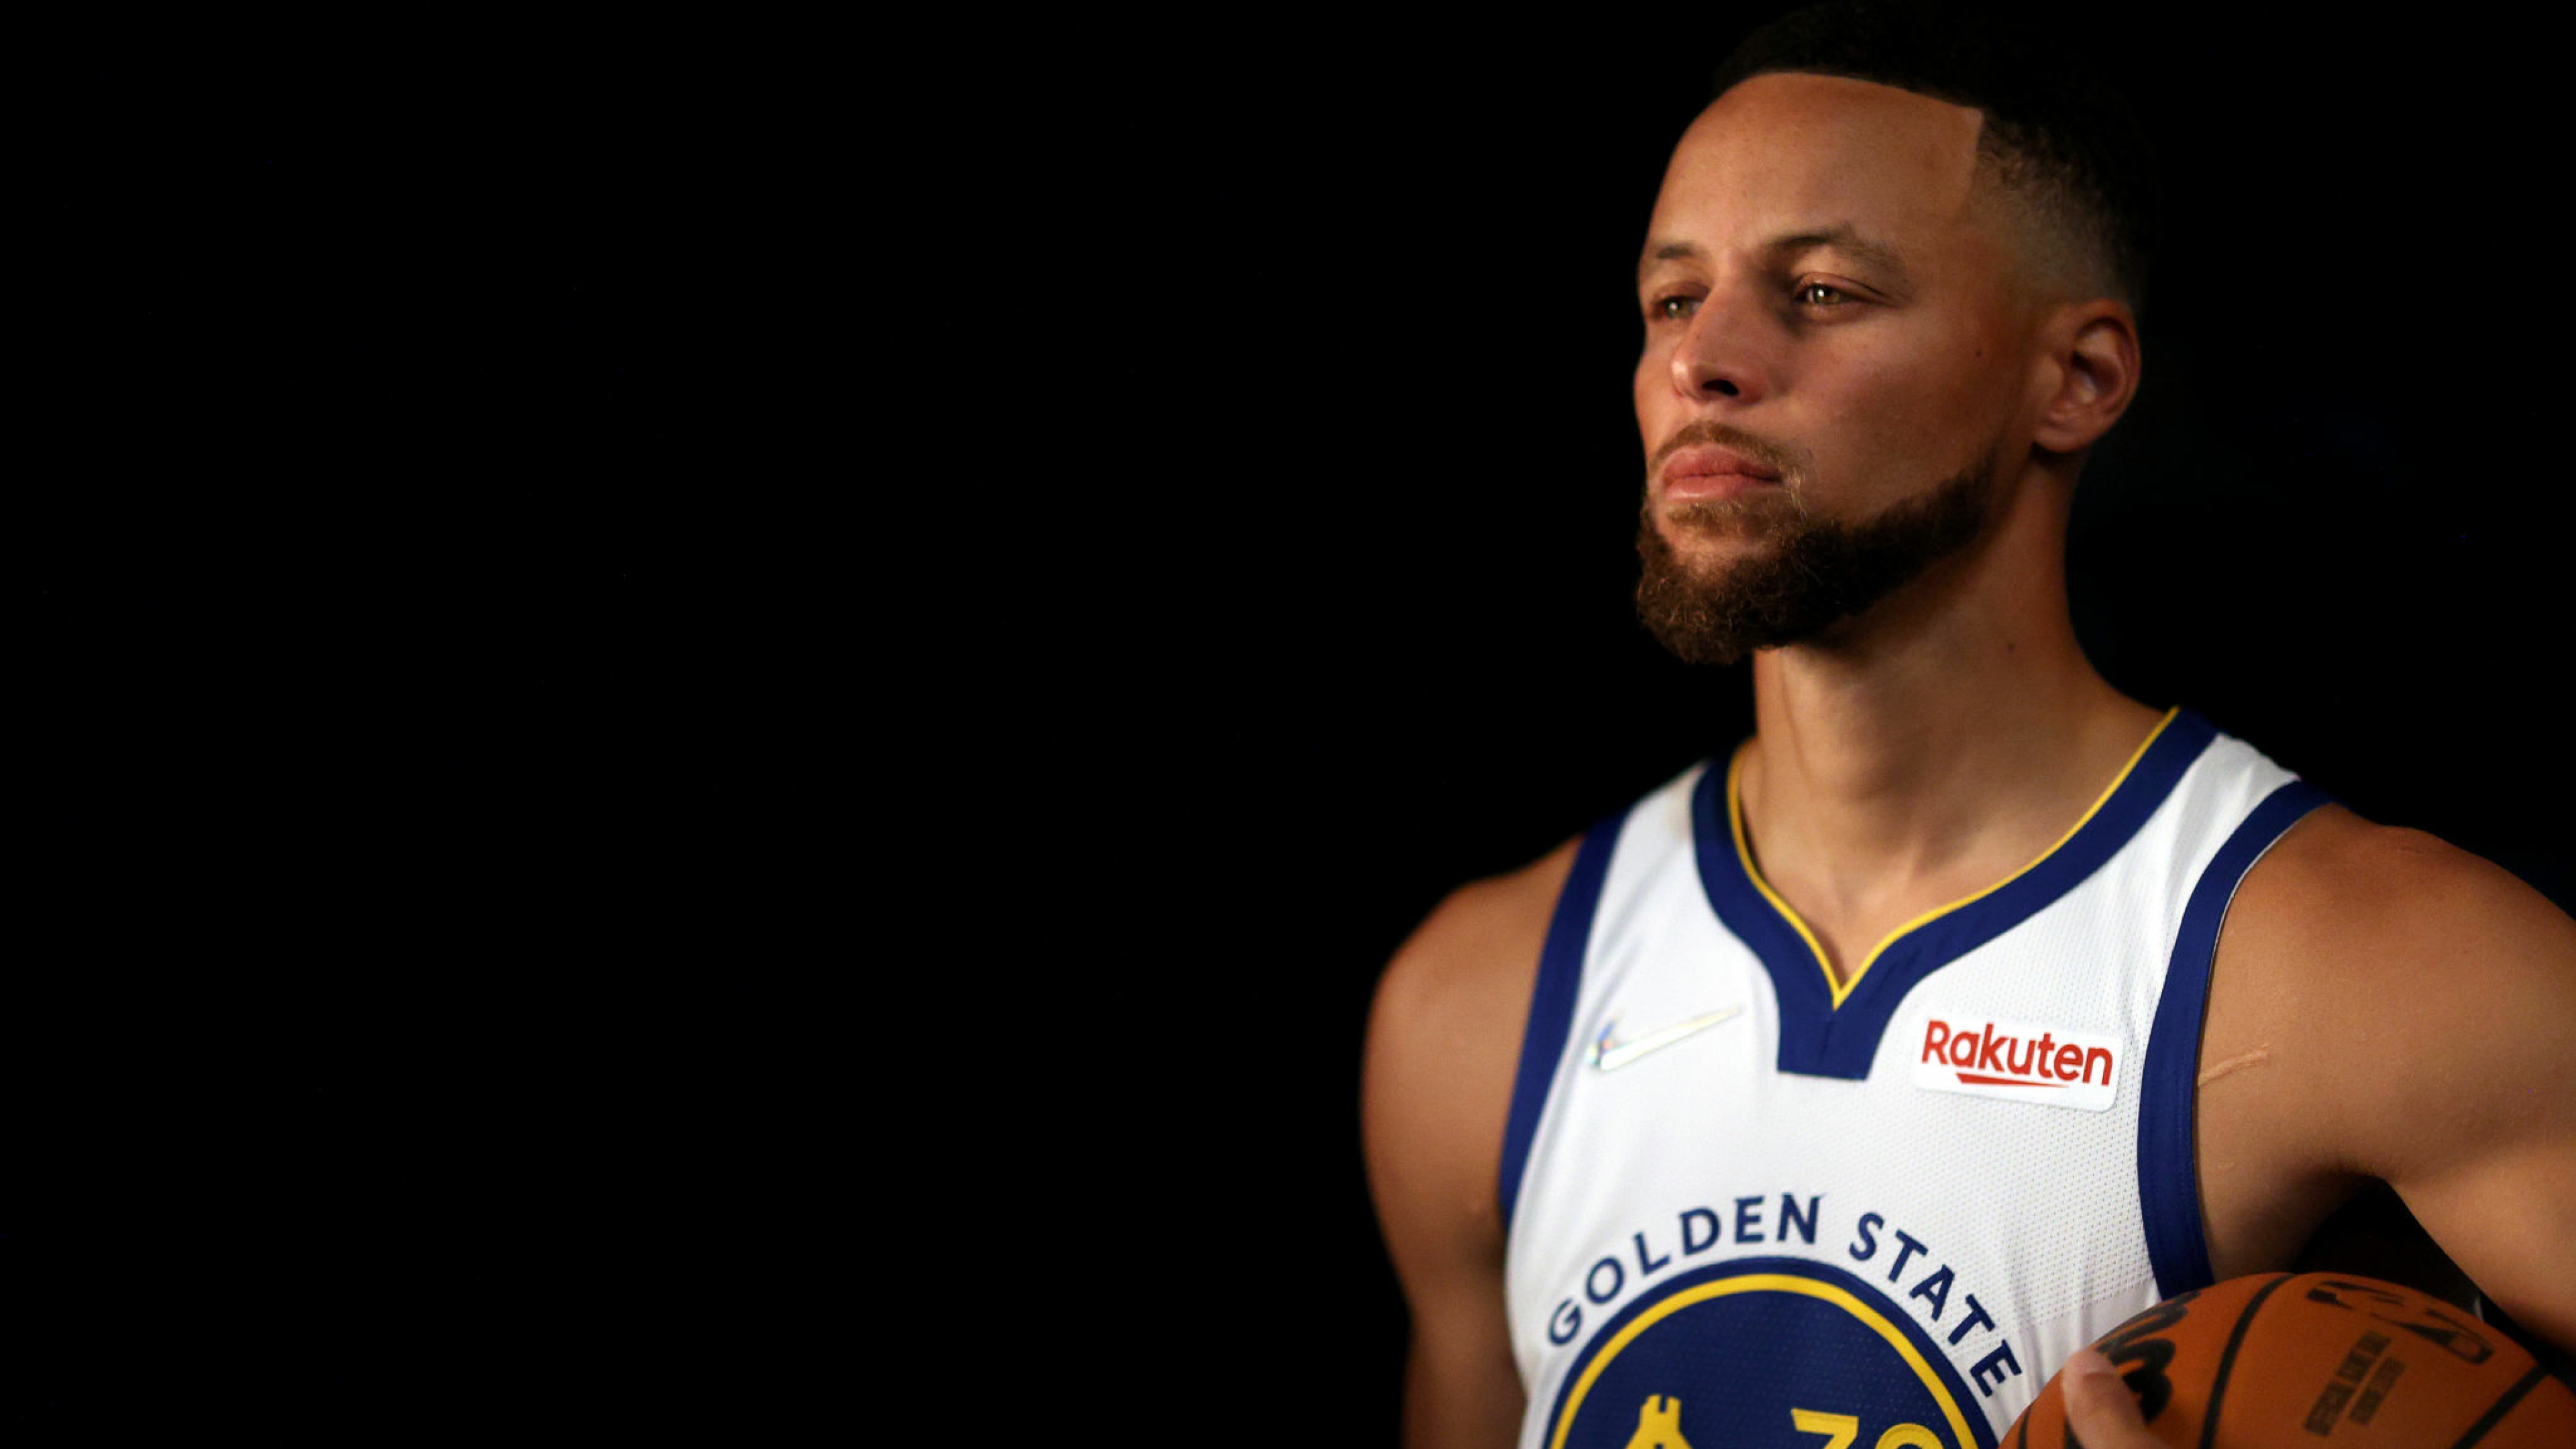 Stephen Curry Wallpaper  Download to your mobile from PHONEKY